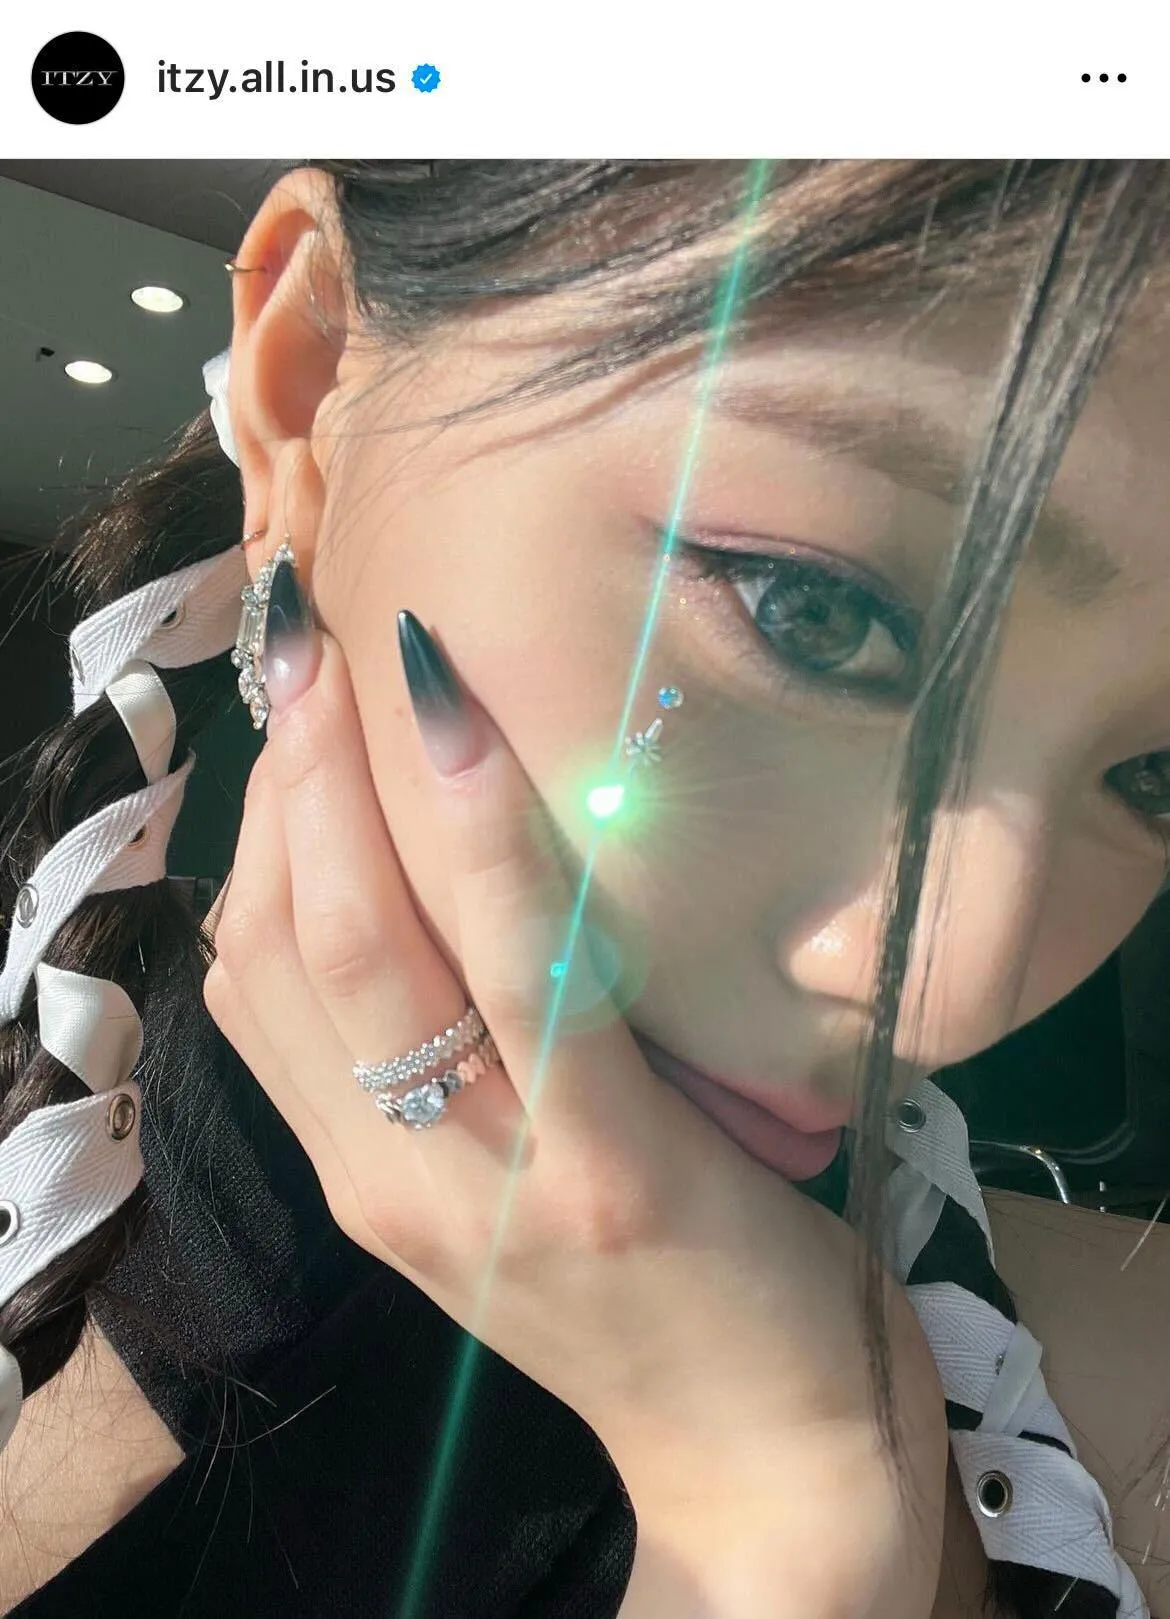  ※ITZY公式Instagram(itzy.all.in.us)より